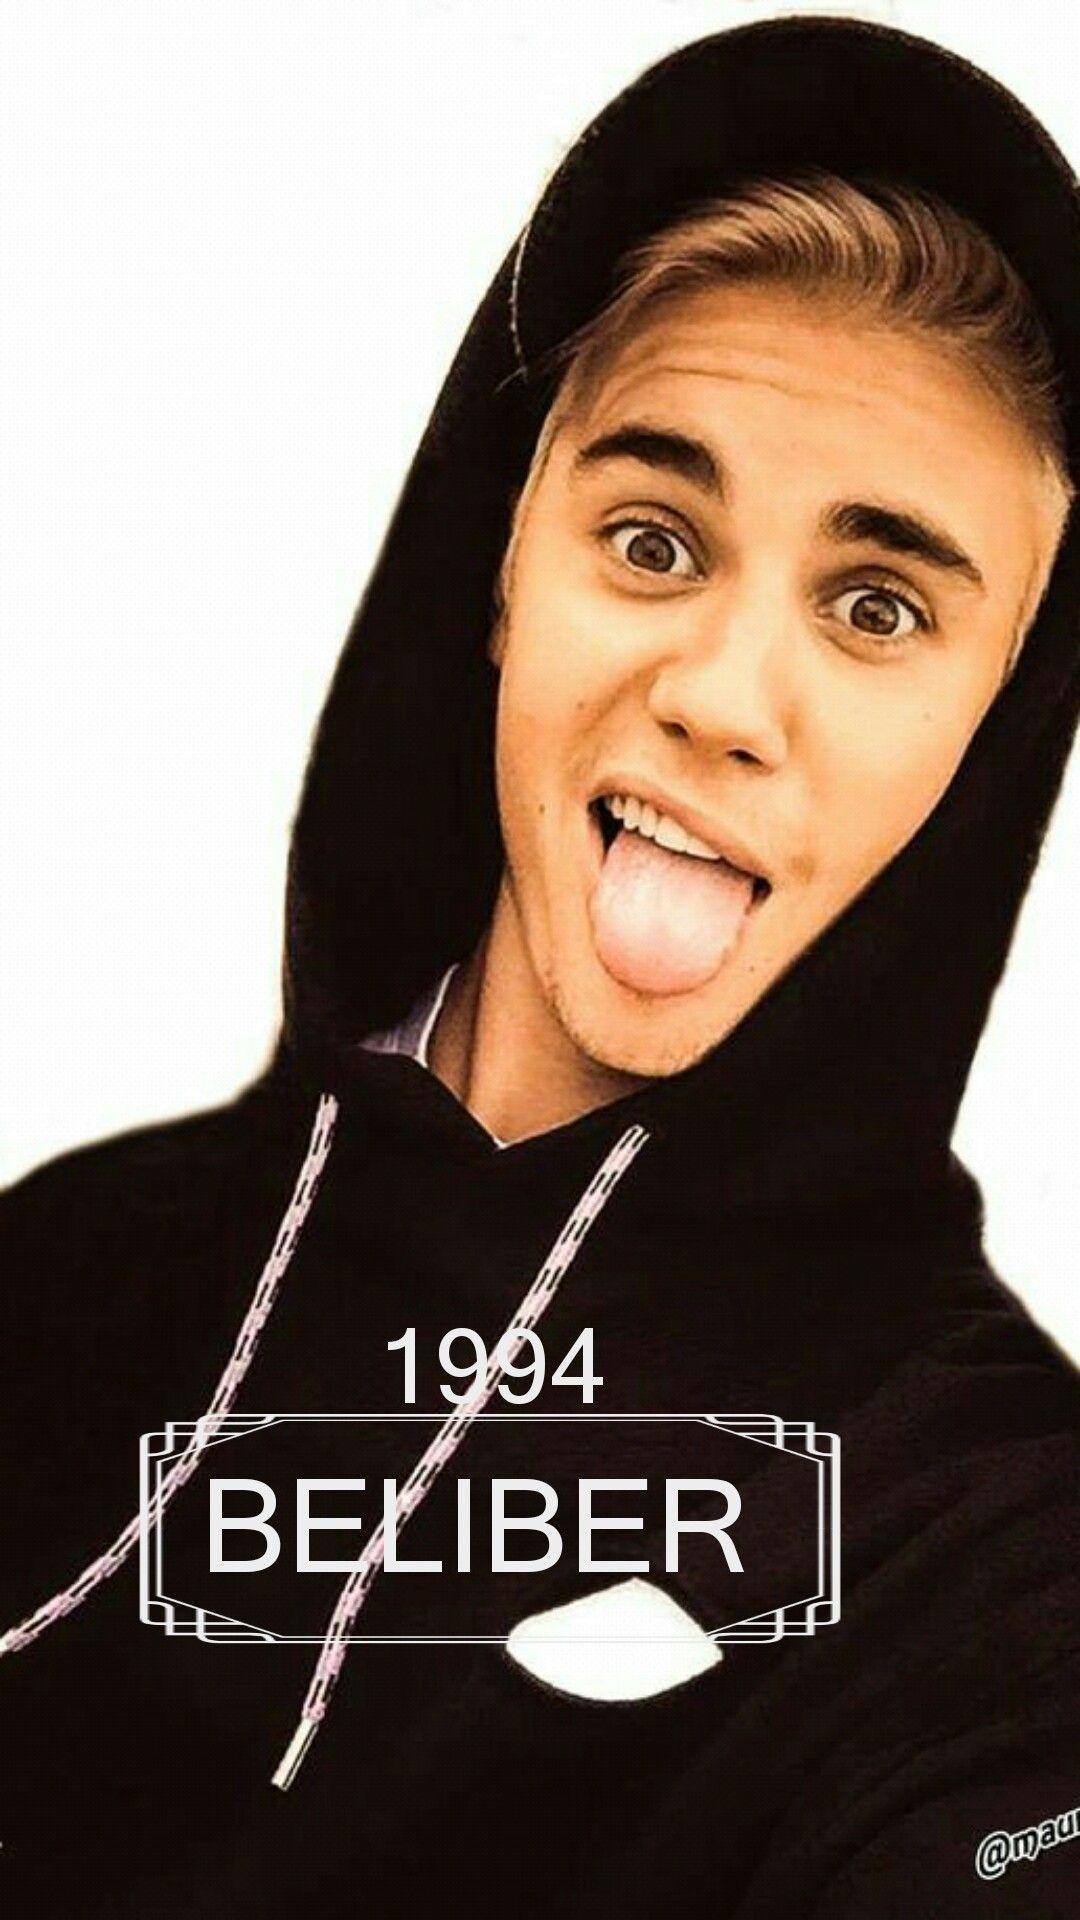 I Also Made This One Of Justin Bieber Lockscreen Wallpaper